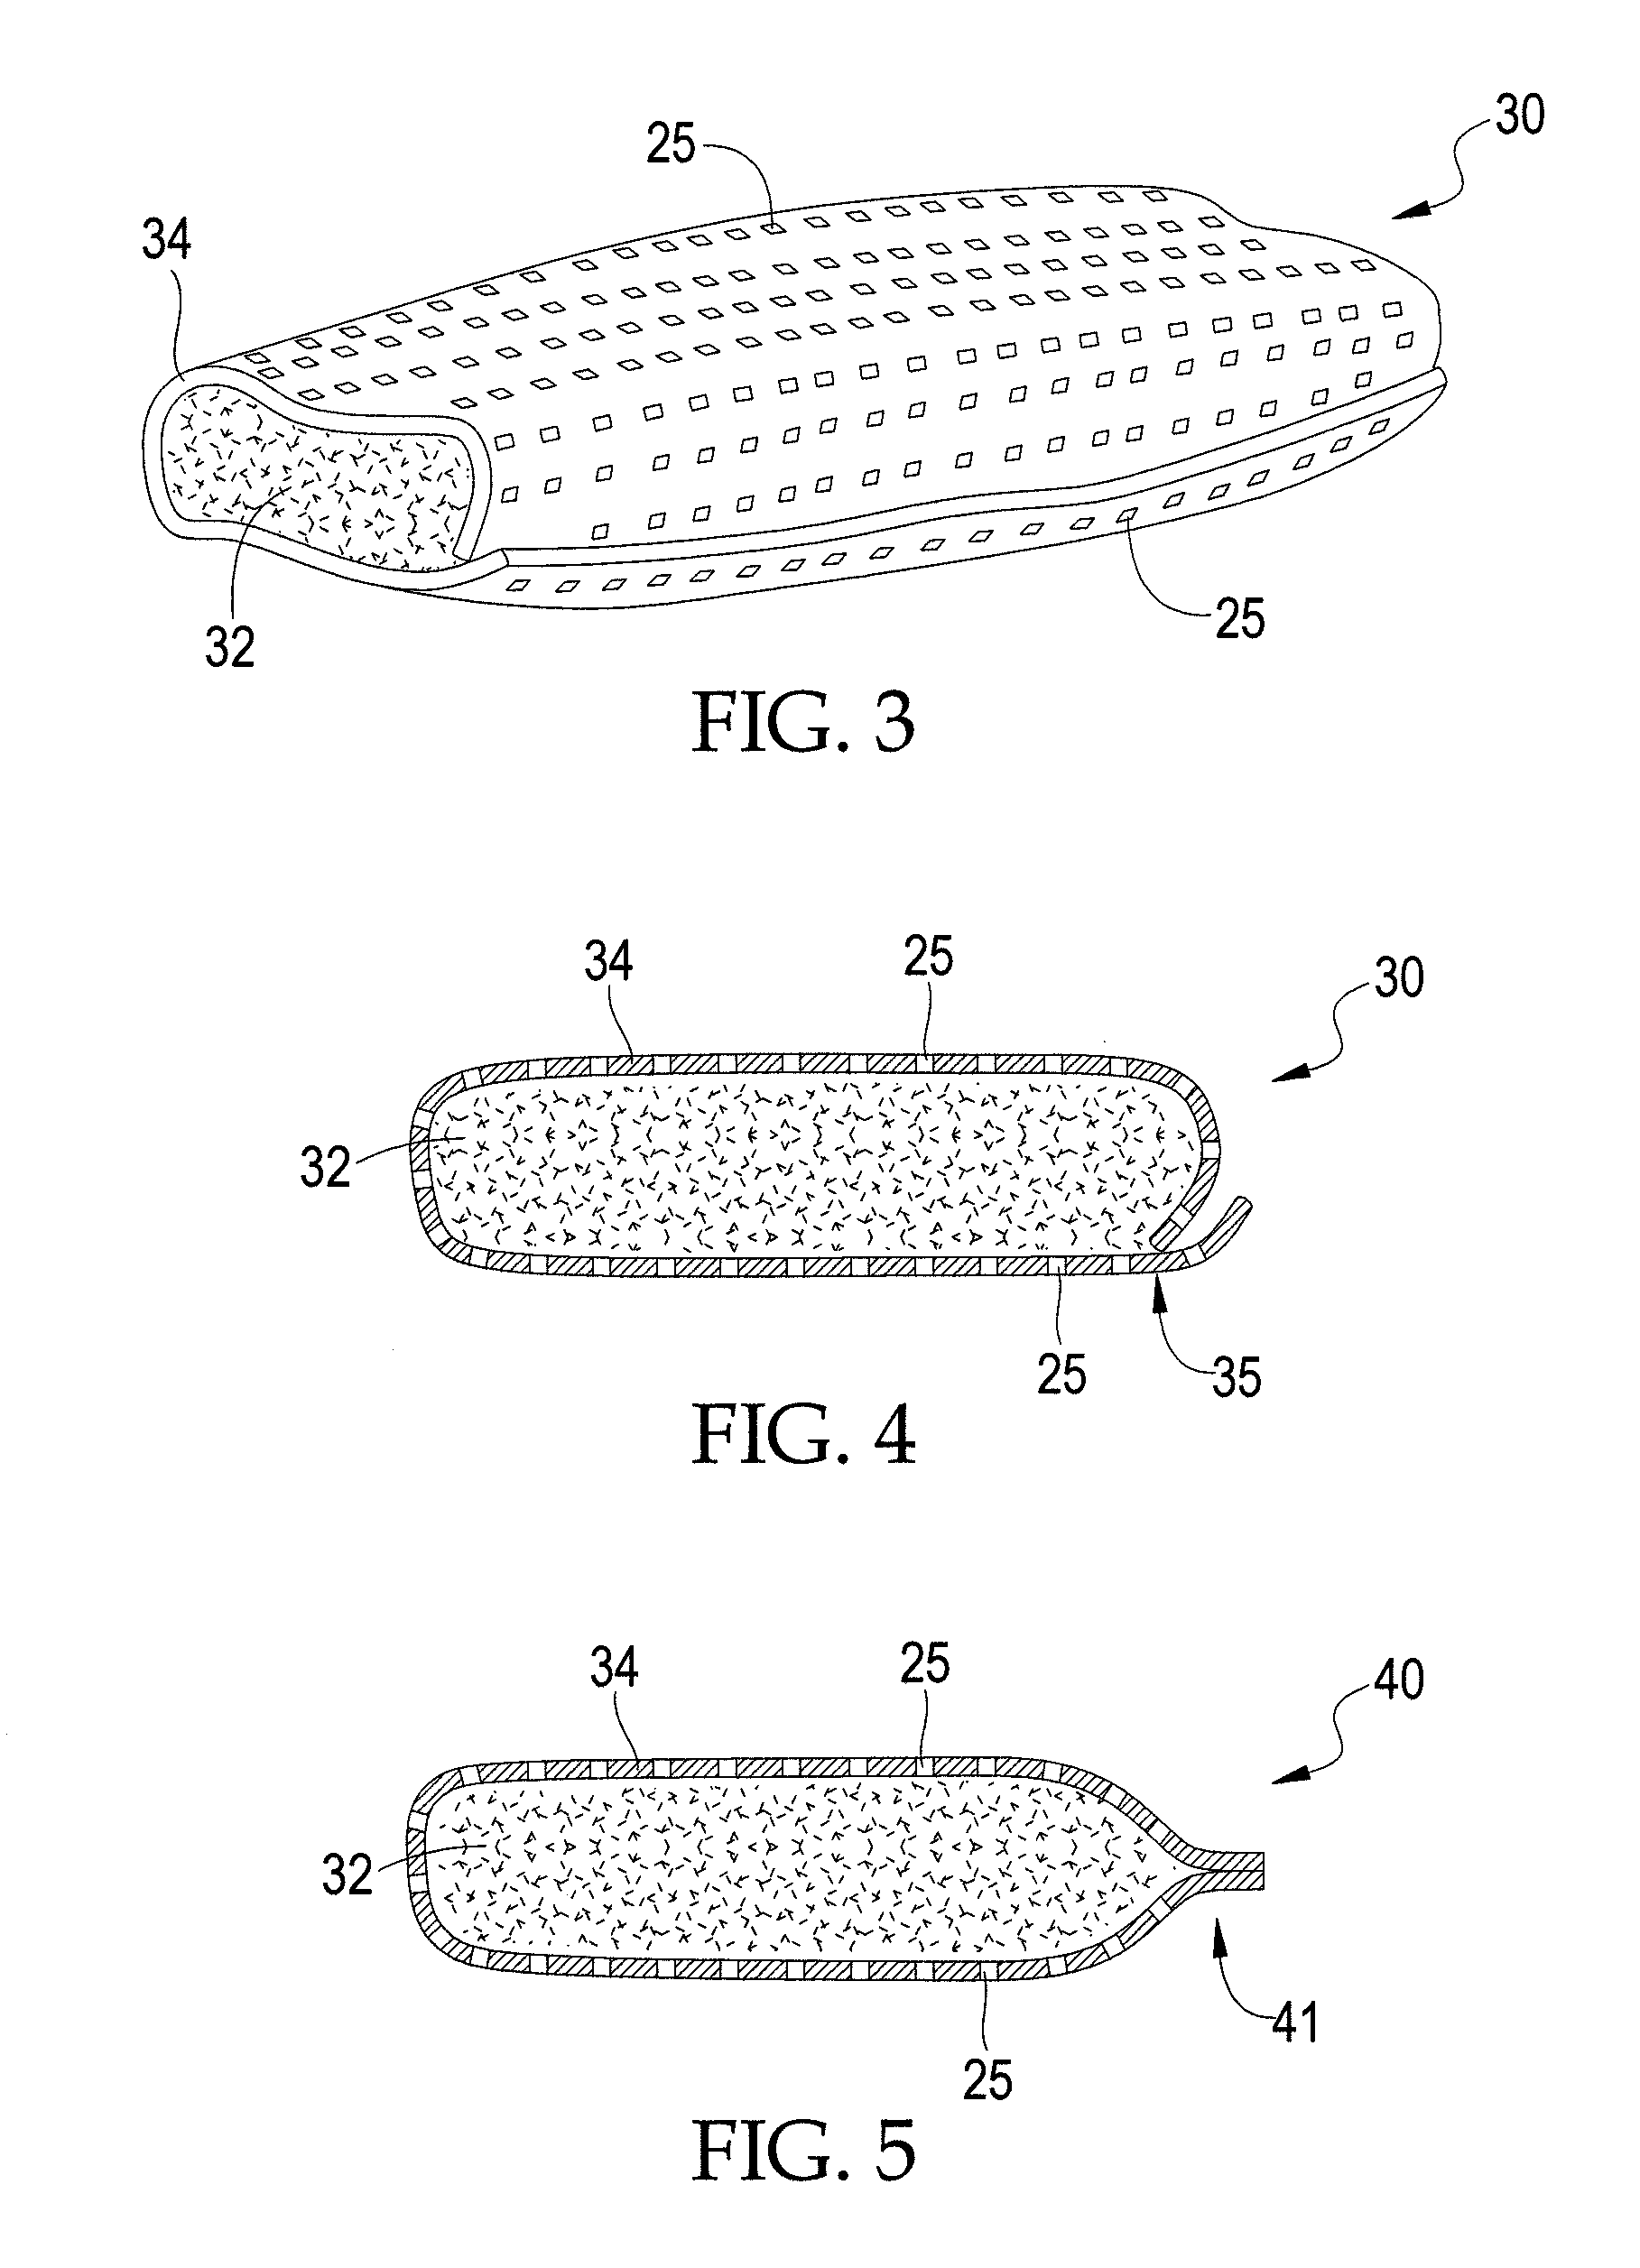 Osteoconductive Implants and Methods of Using Same